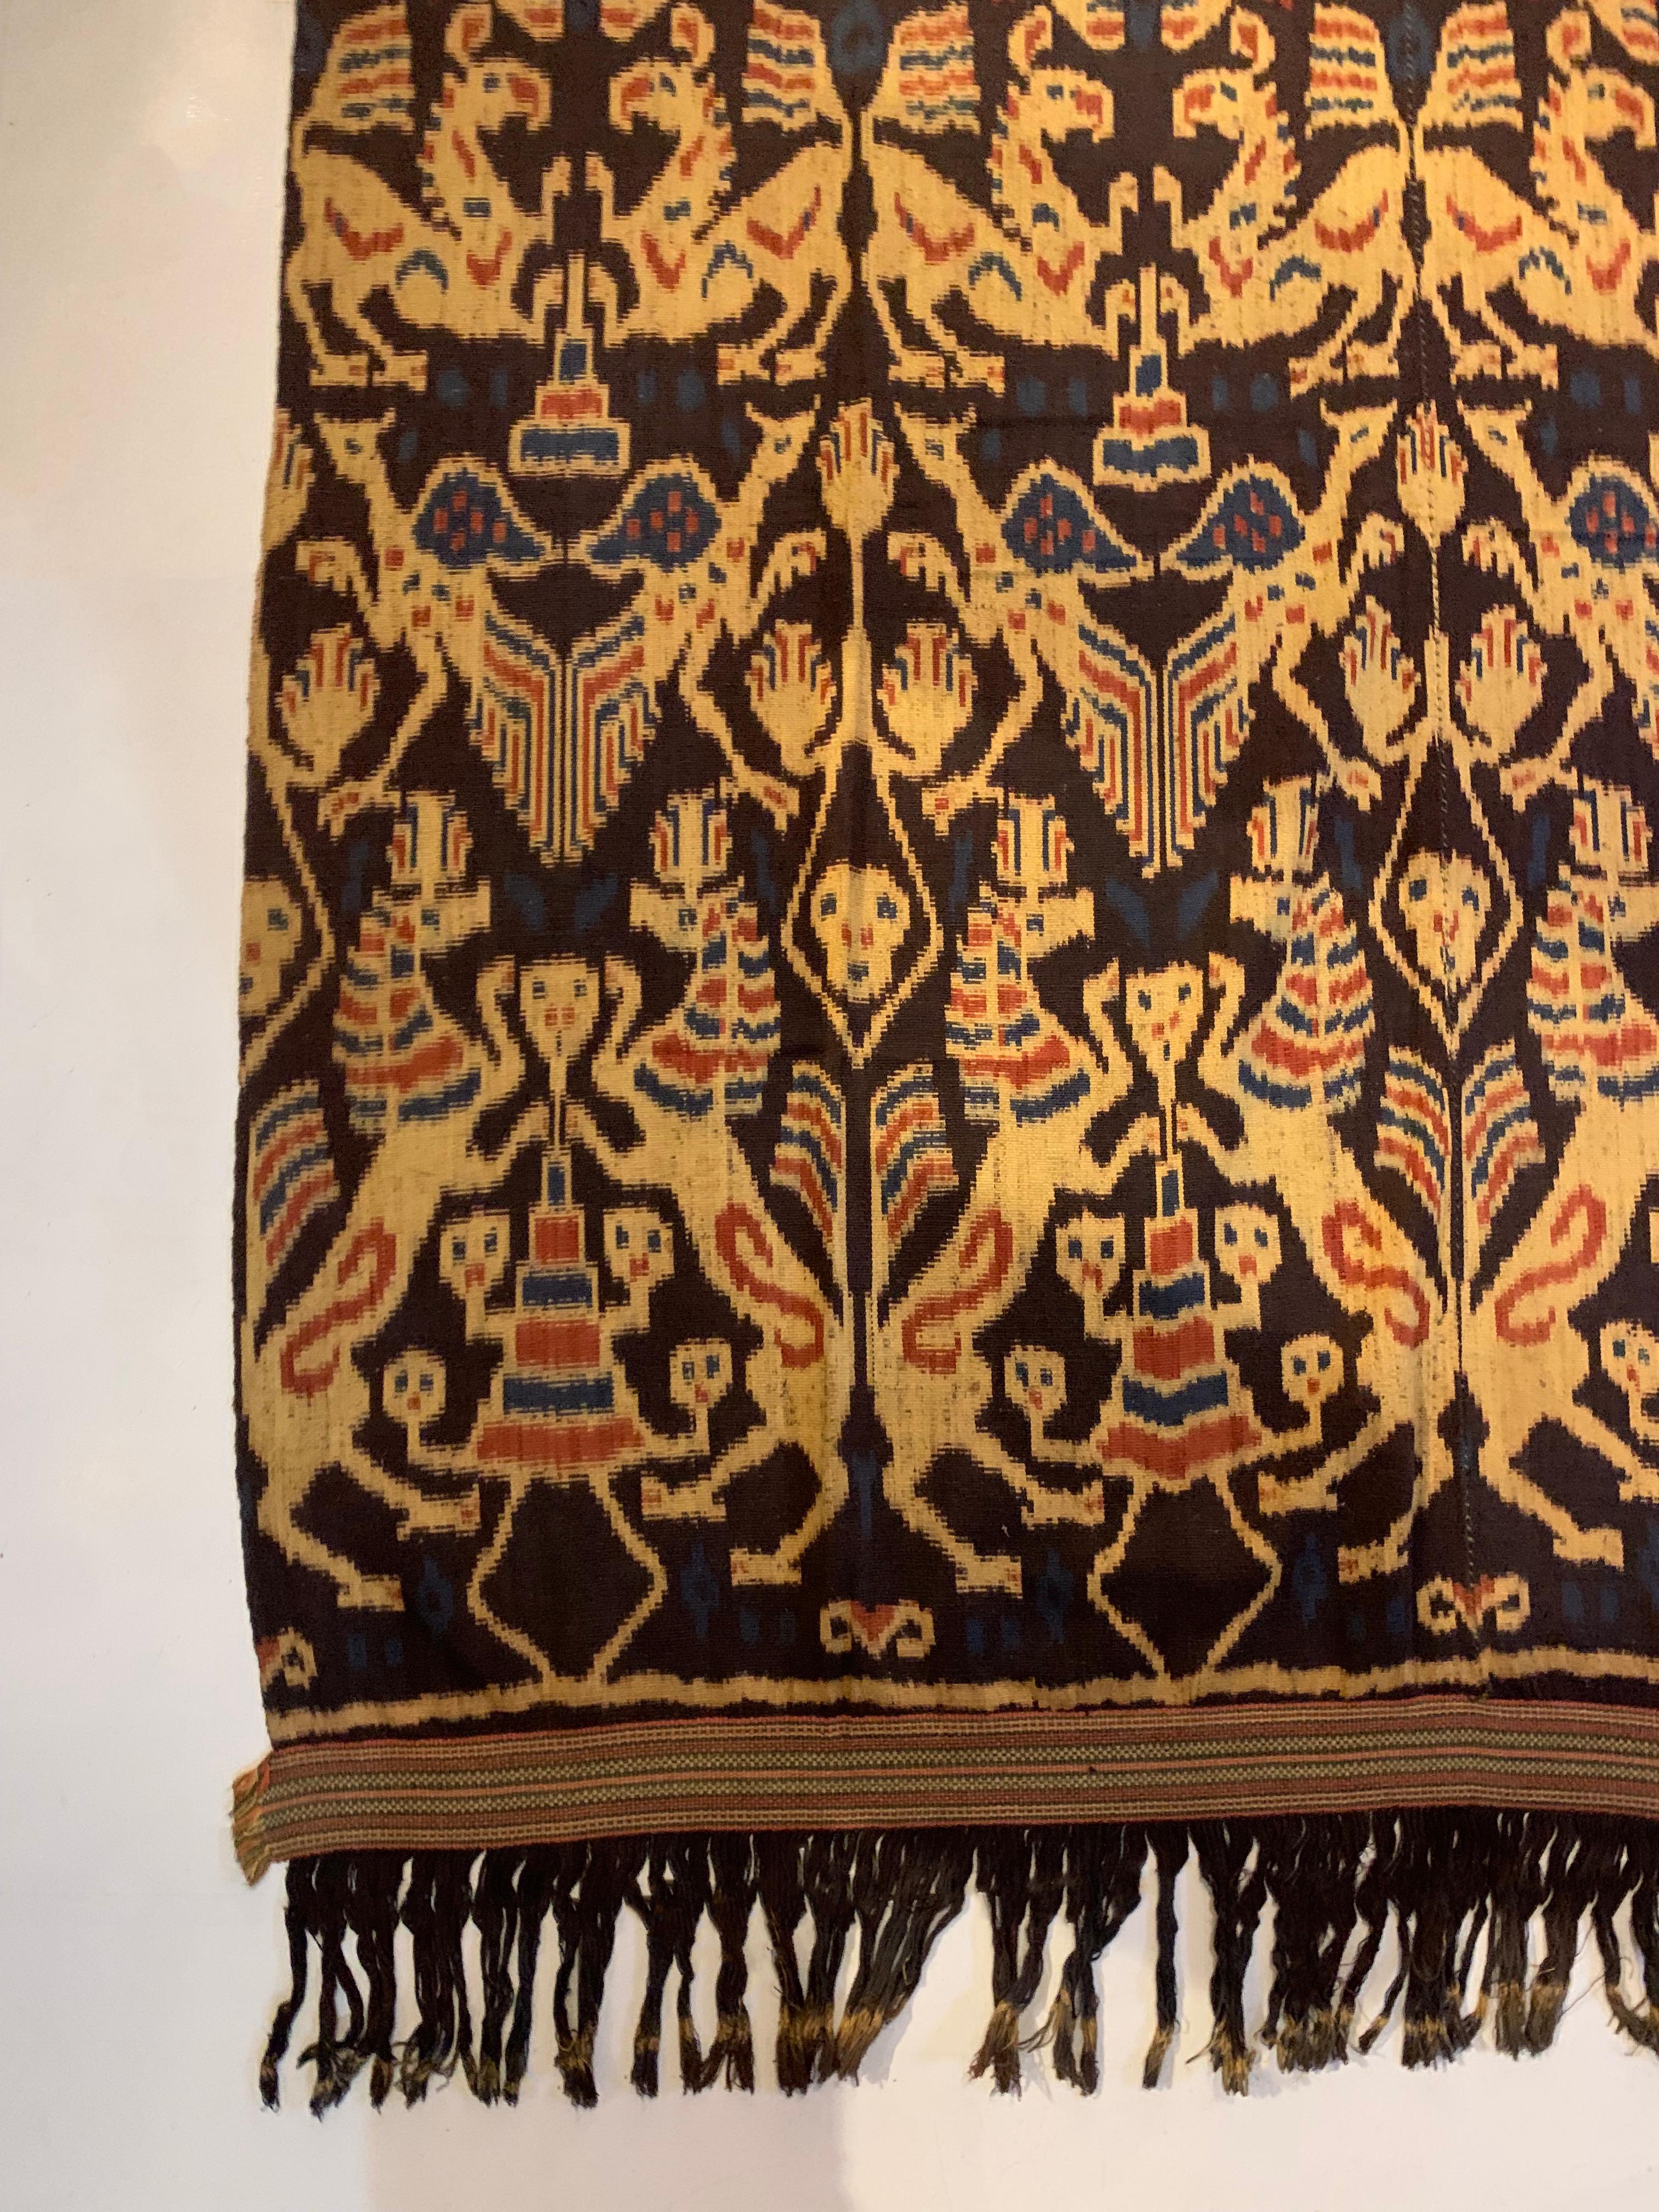 Indonesian Rare Ikat Textile from Sumba Island Stunning Tribal Motifs, Indonesia  For Sale